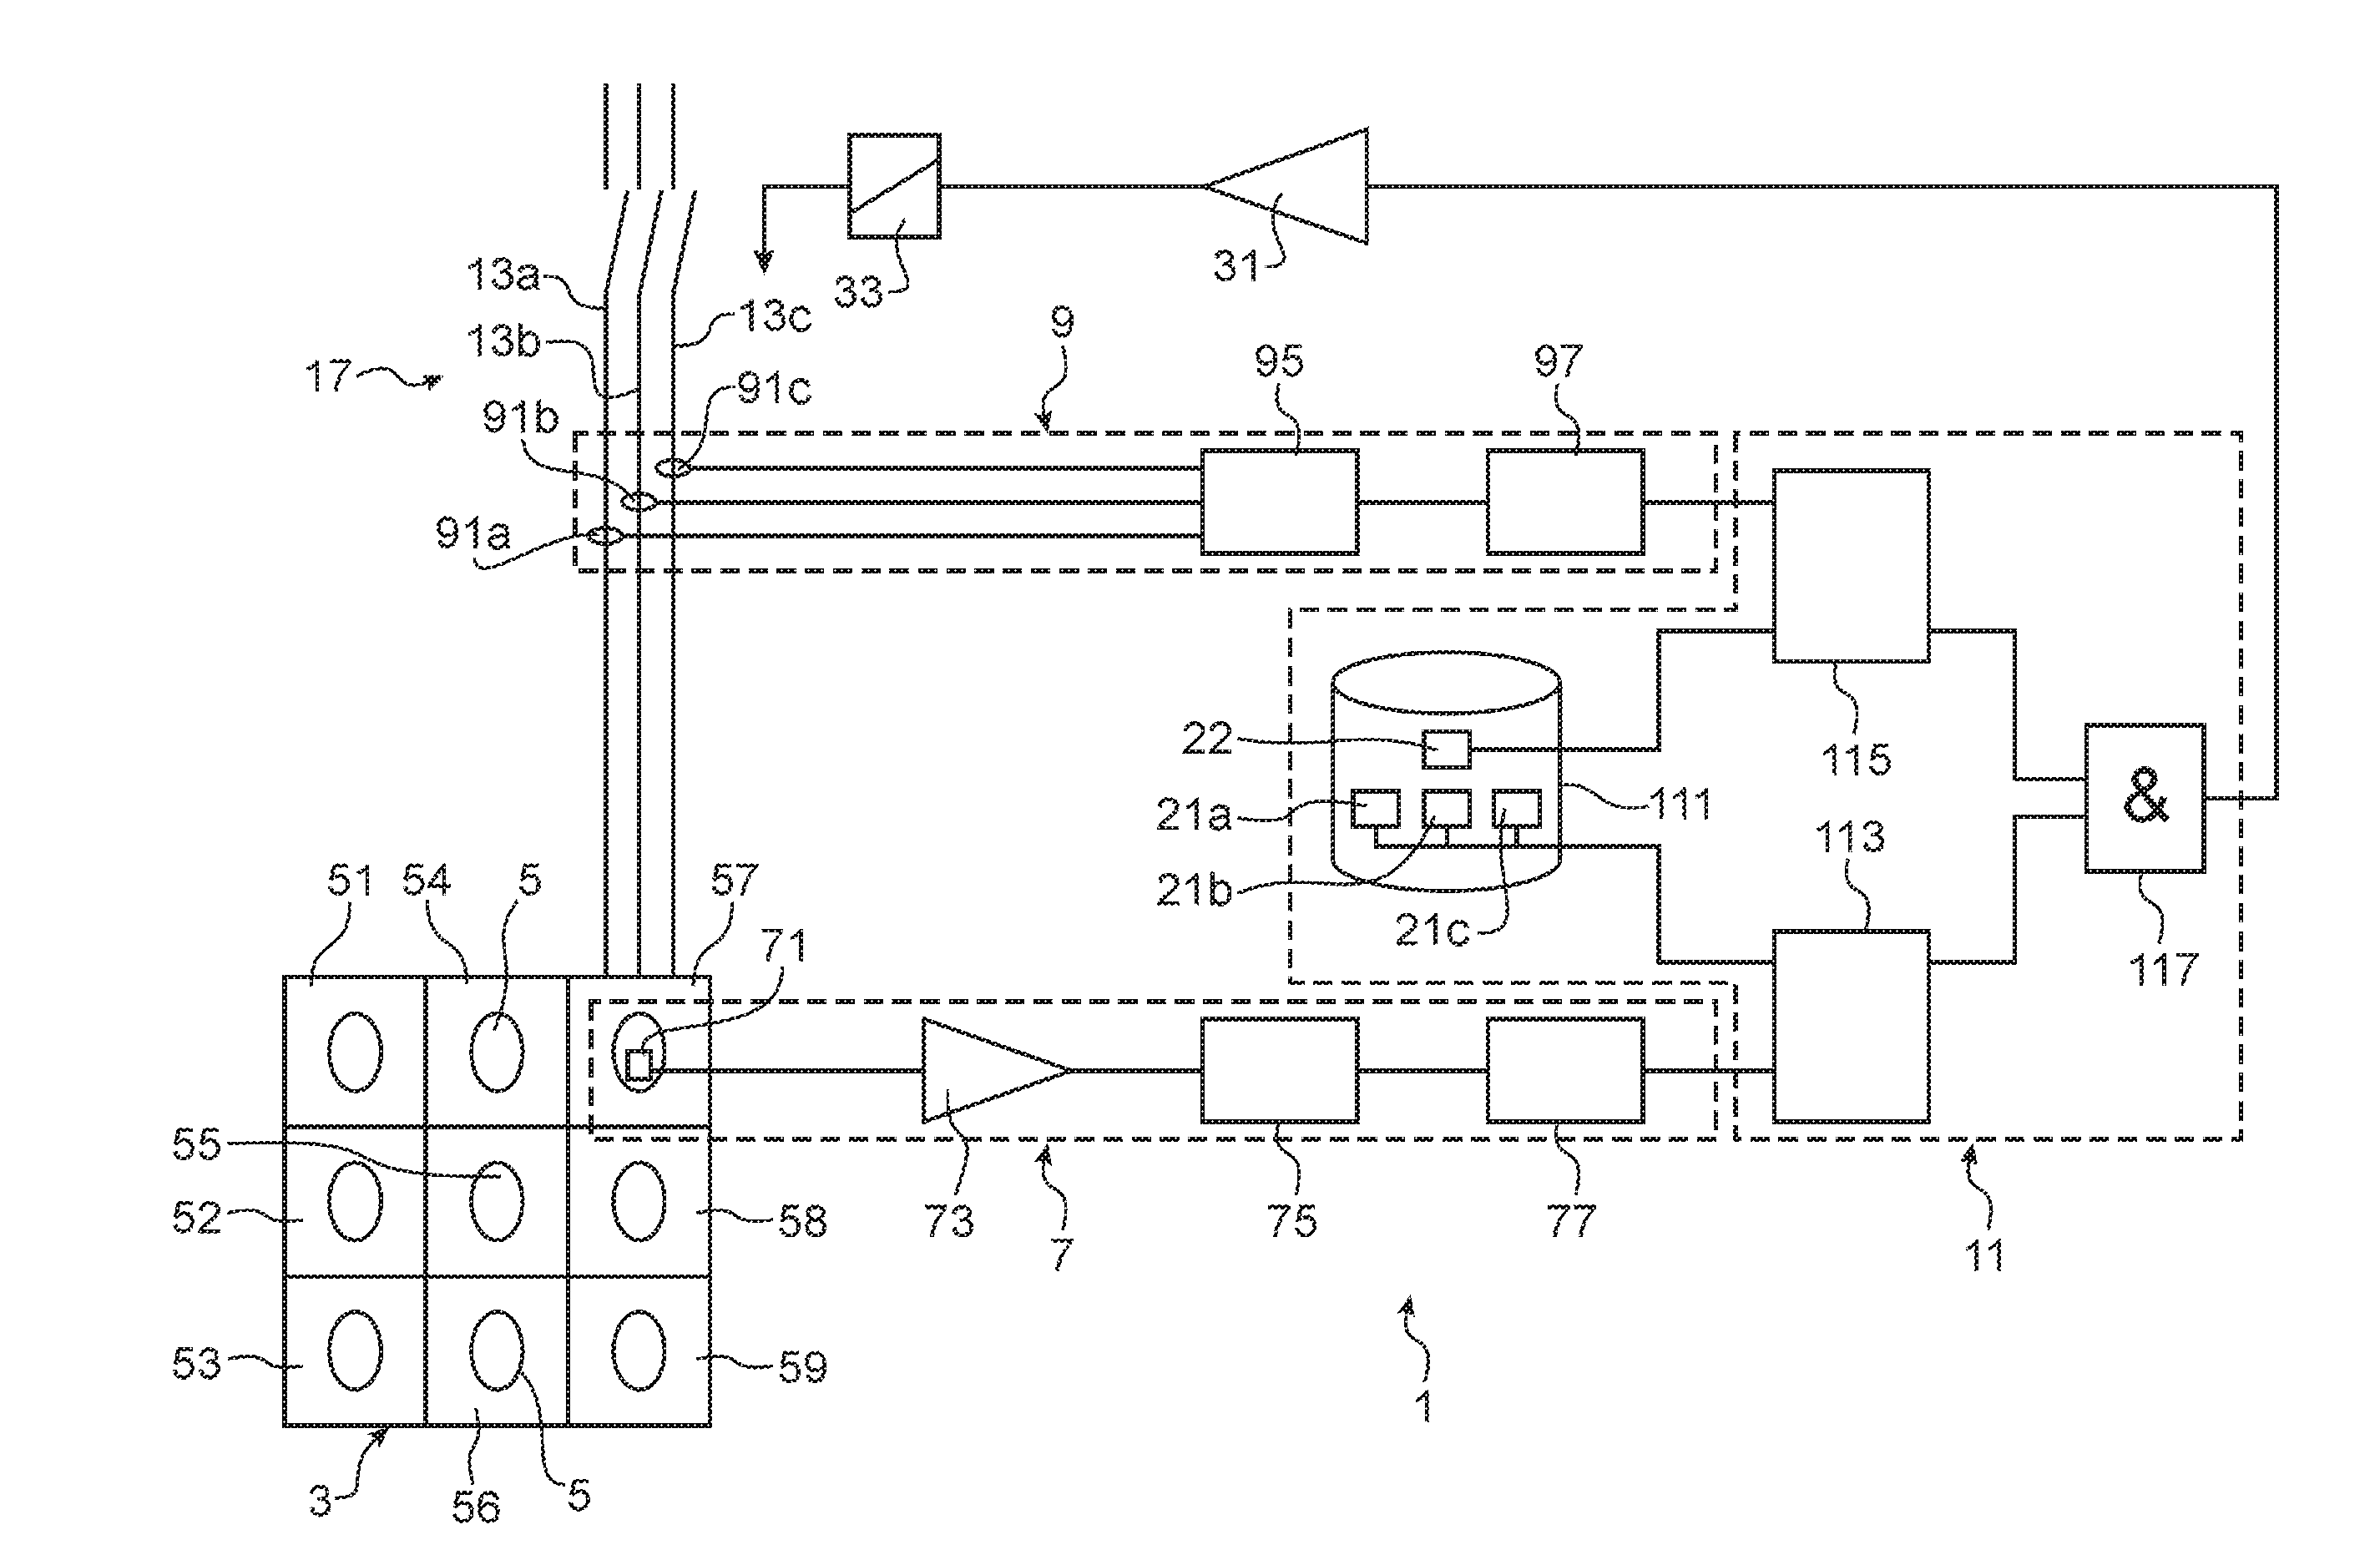 Method and system of detection and passivation of an electric arc